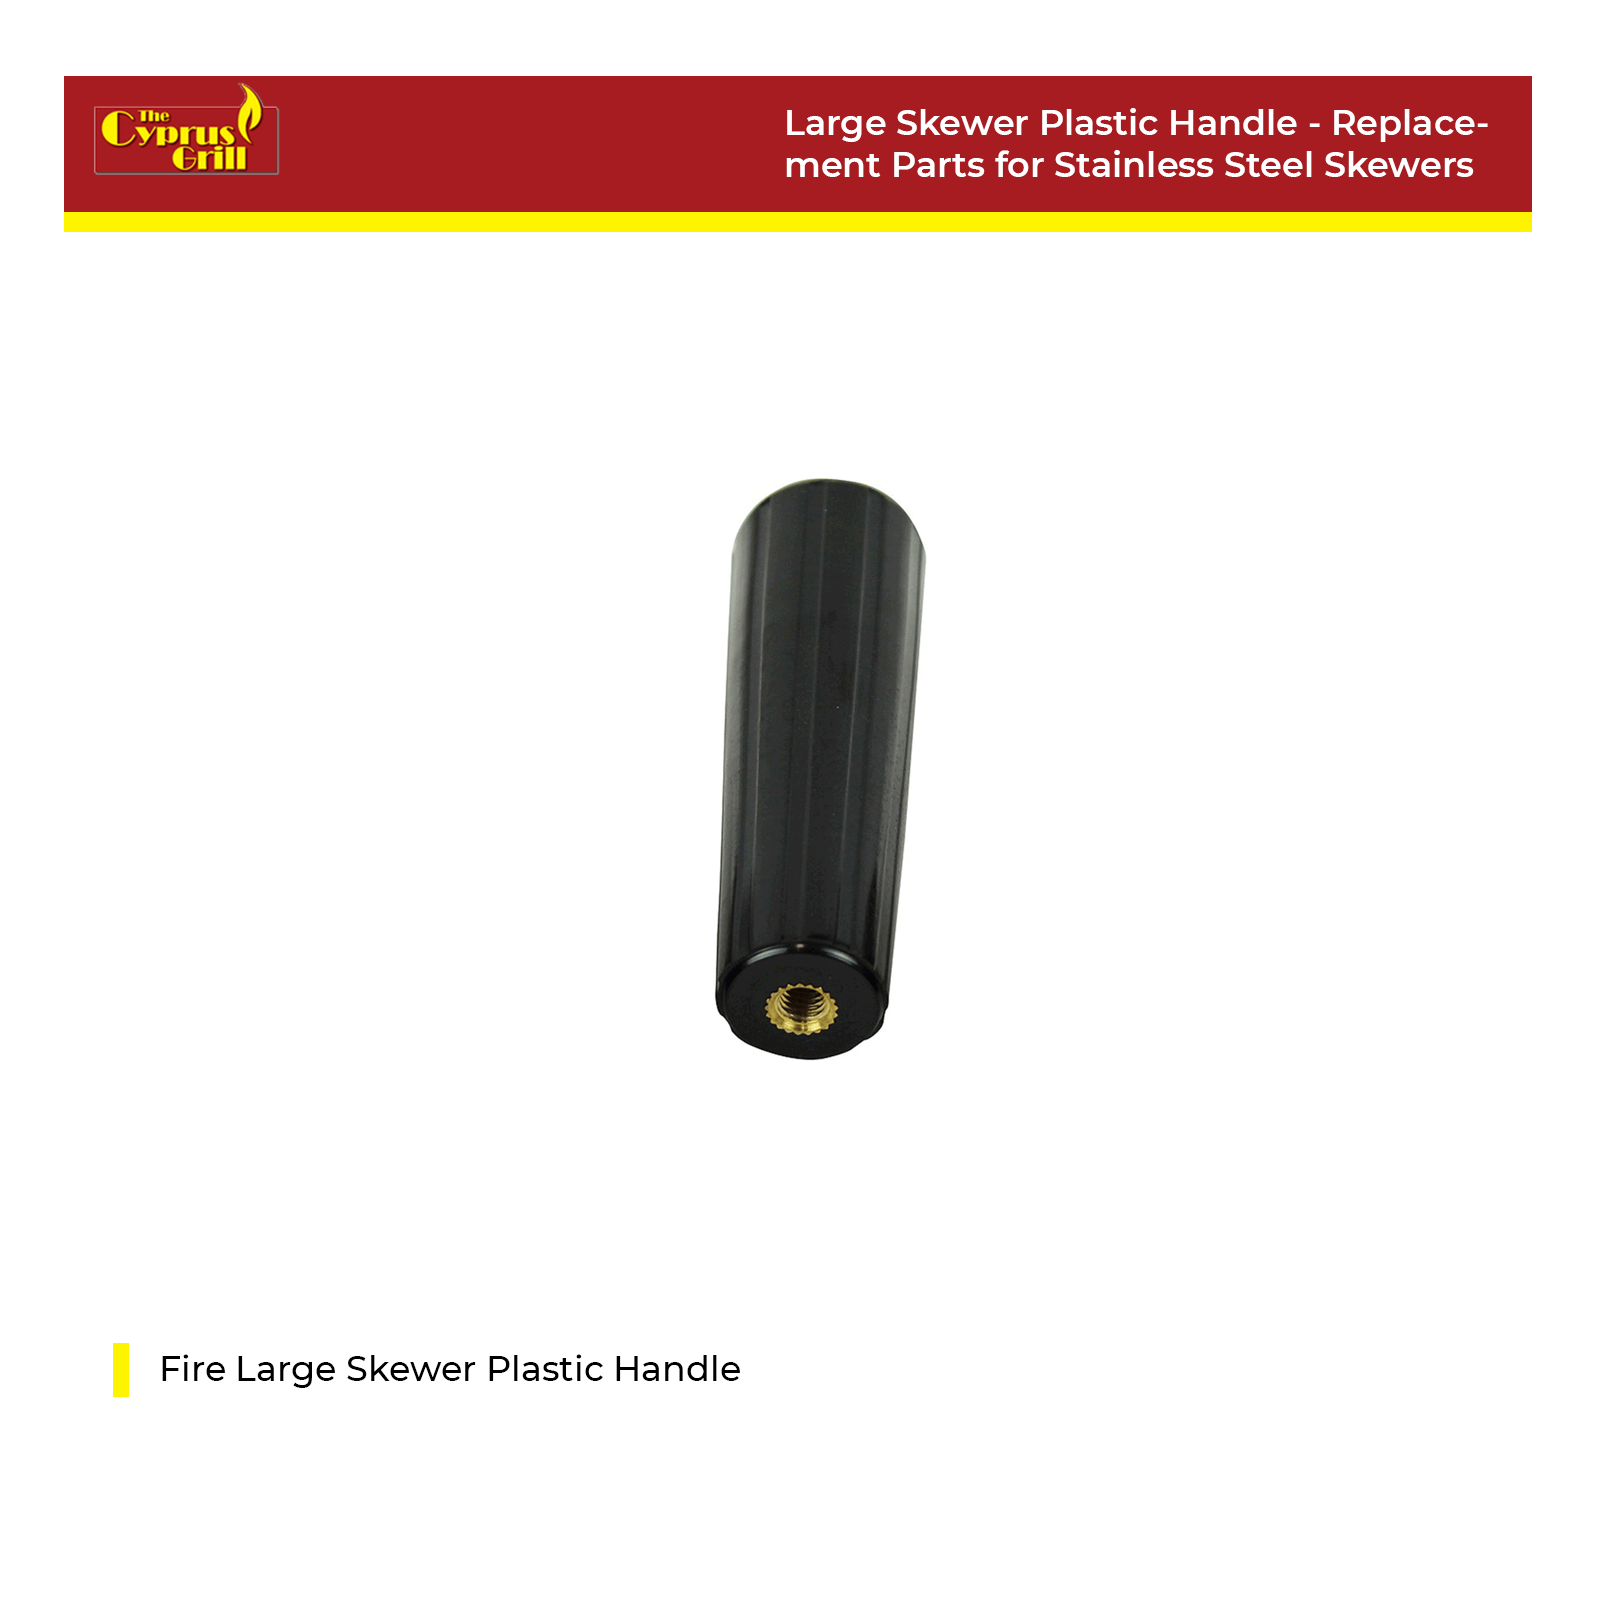 Large Skewer Plastic Handle - Replacement Parts for Stainless Steel Skewers